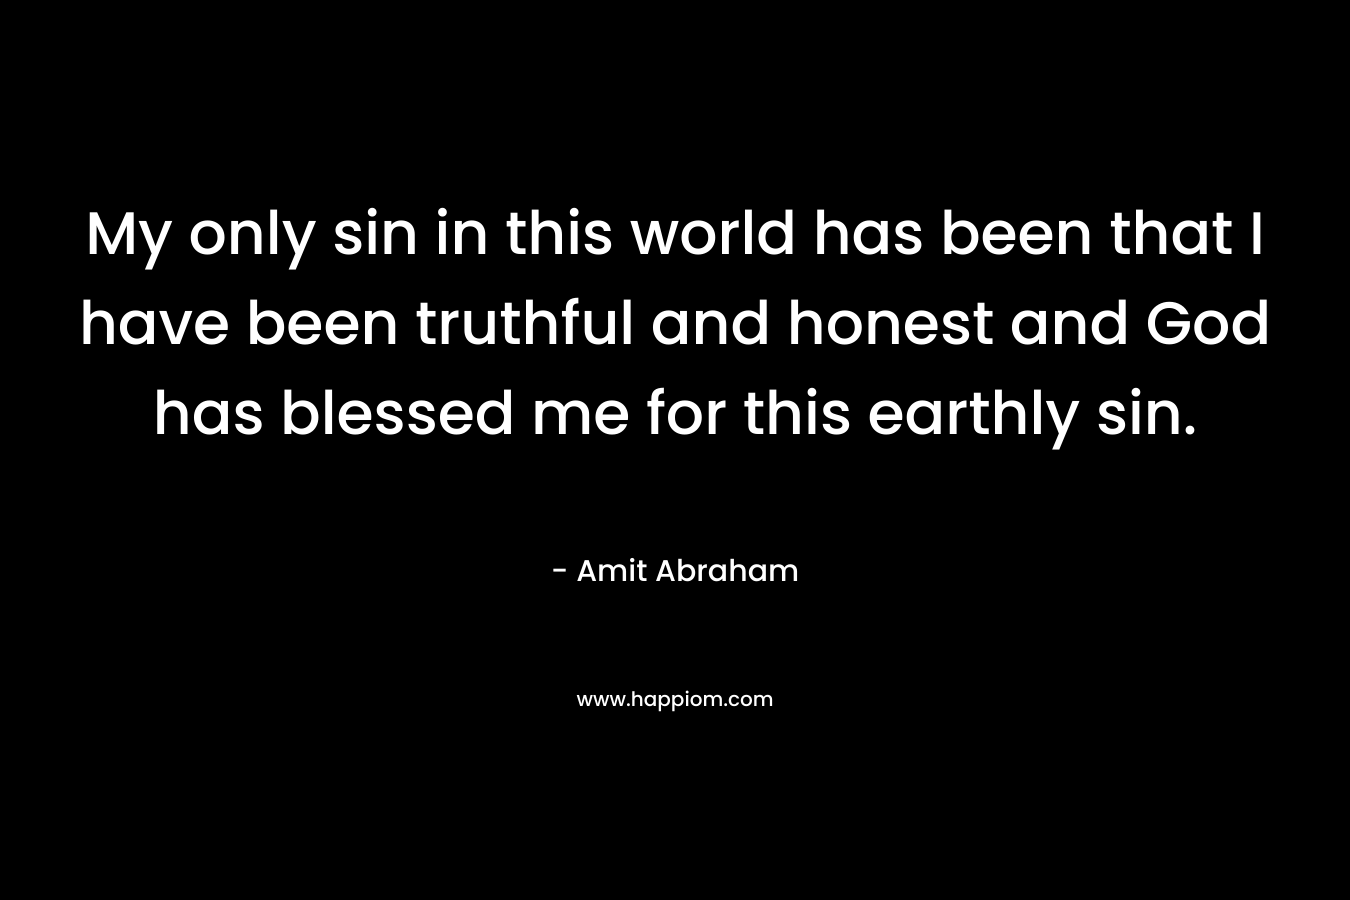 My only sin in this world has been that I have been truthful and honest and God has blessed me for this earthly sin.